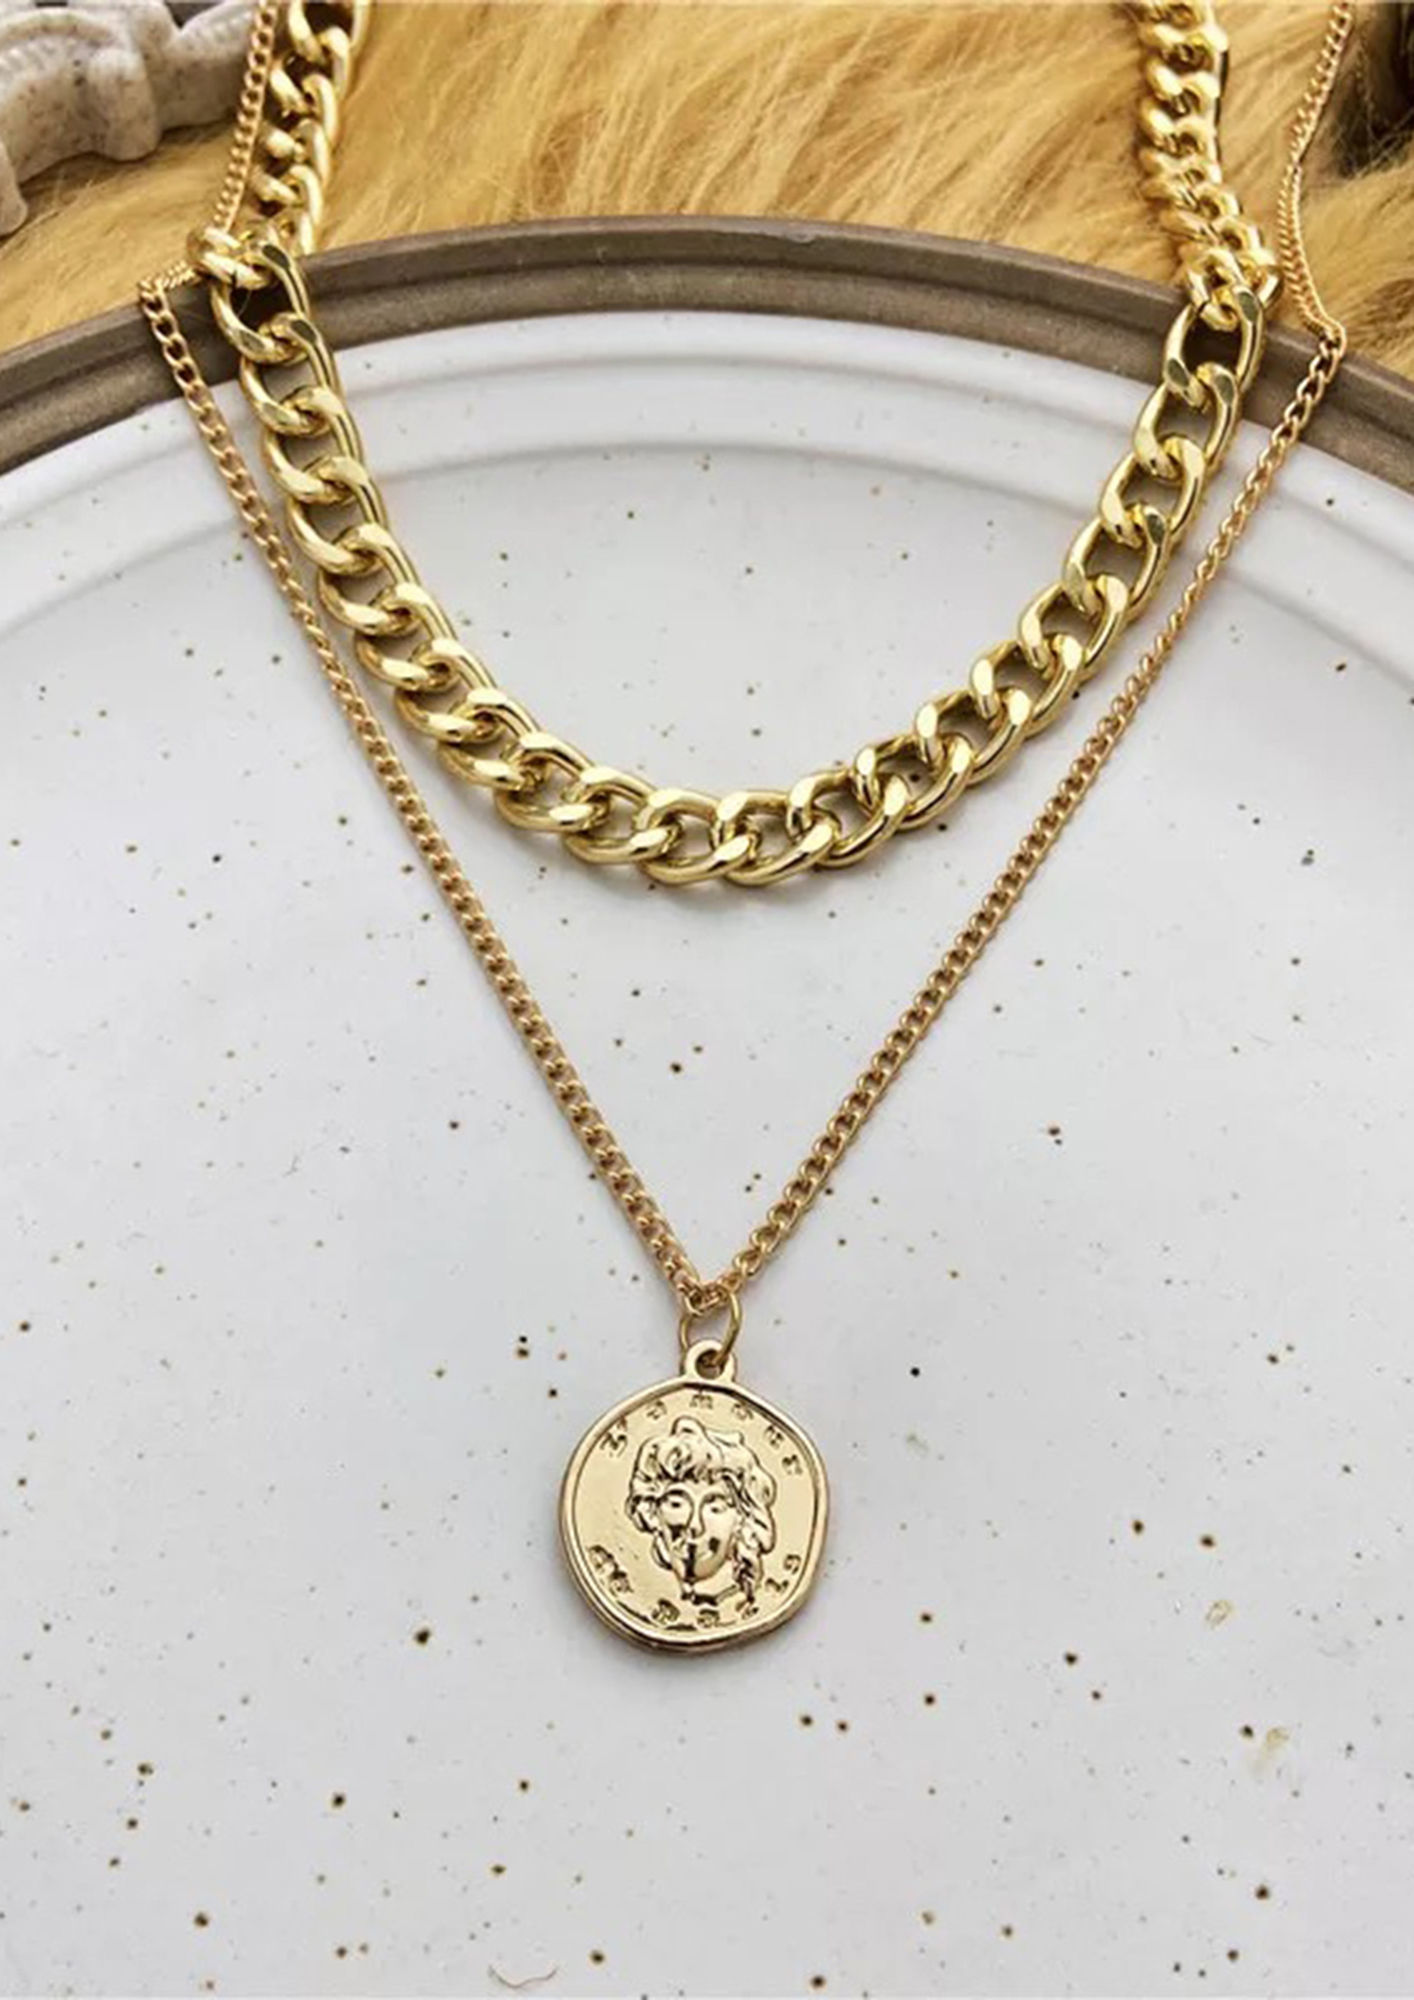 Bright Bold Oval 21k Gold Coin Necklace | Gold coin necklace, Gold coins,  Yellow gold necklaces